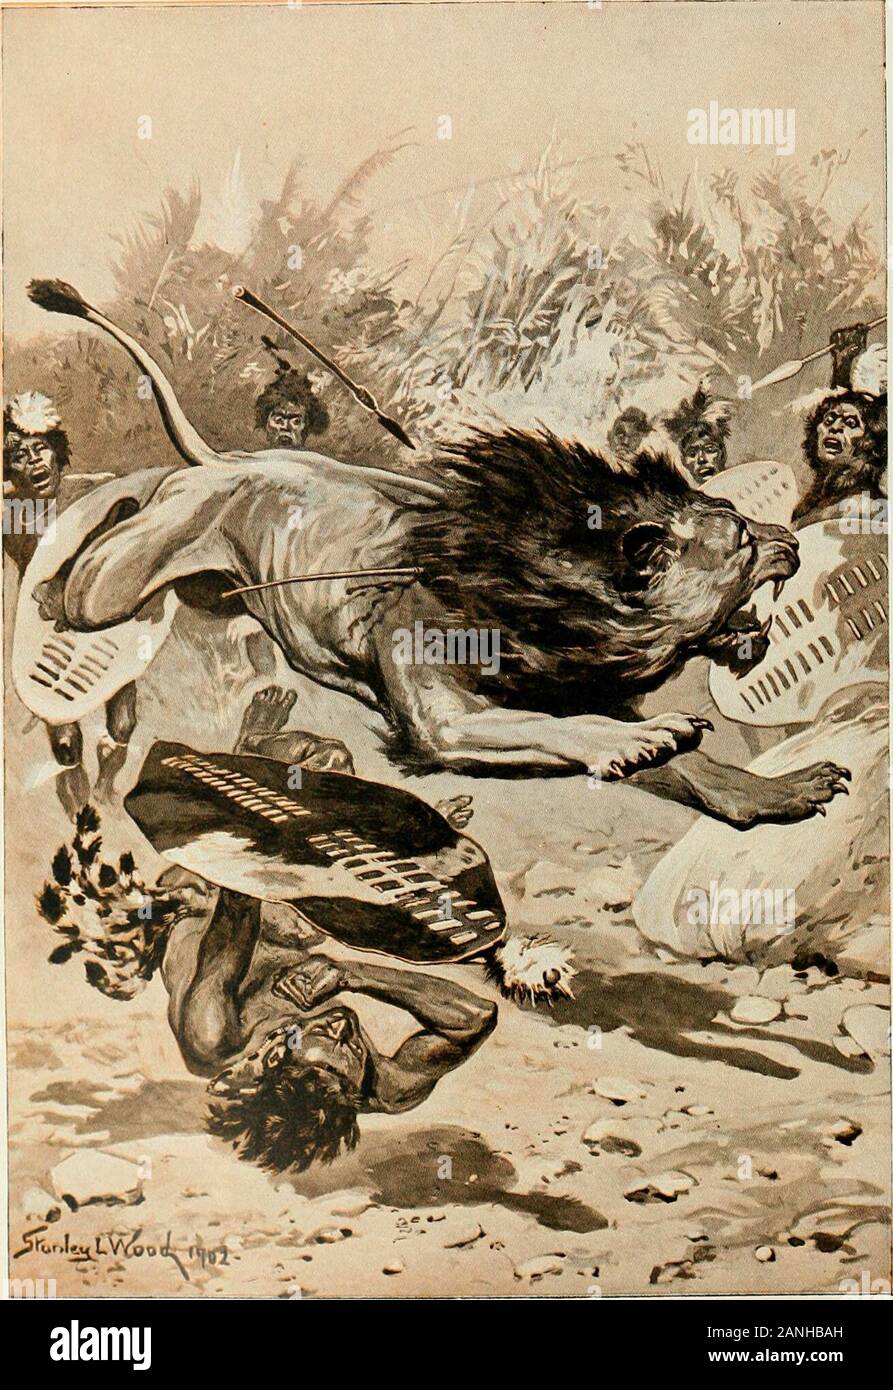 The sports of the world, with illustrations from drawings and photographs . ^ I »* *v-; -*i. BULL-FIGHTING IN PORTUGAL(Photo - Dr Anachoreta.). AS THE LION CHARGED, ITS CHALLENGER, AFTER MAKING ONE STAB AT IT WITH HIS ASSEGAI, WASDASHED TO THE GROUND, BUT ENDEAVOURED TO FALL BENEATH THE COVER OF HIS GREATOXHIDE SHIELD 0&gt;- 10). 2 Stock Photo